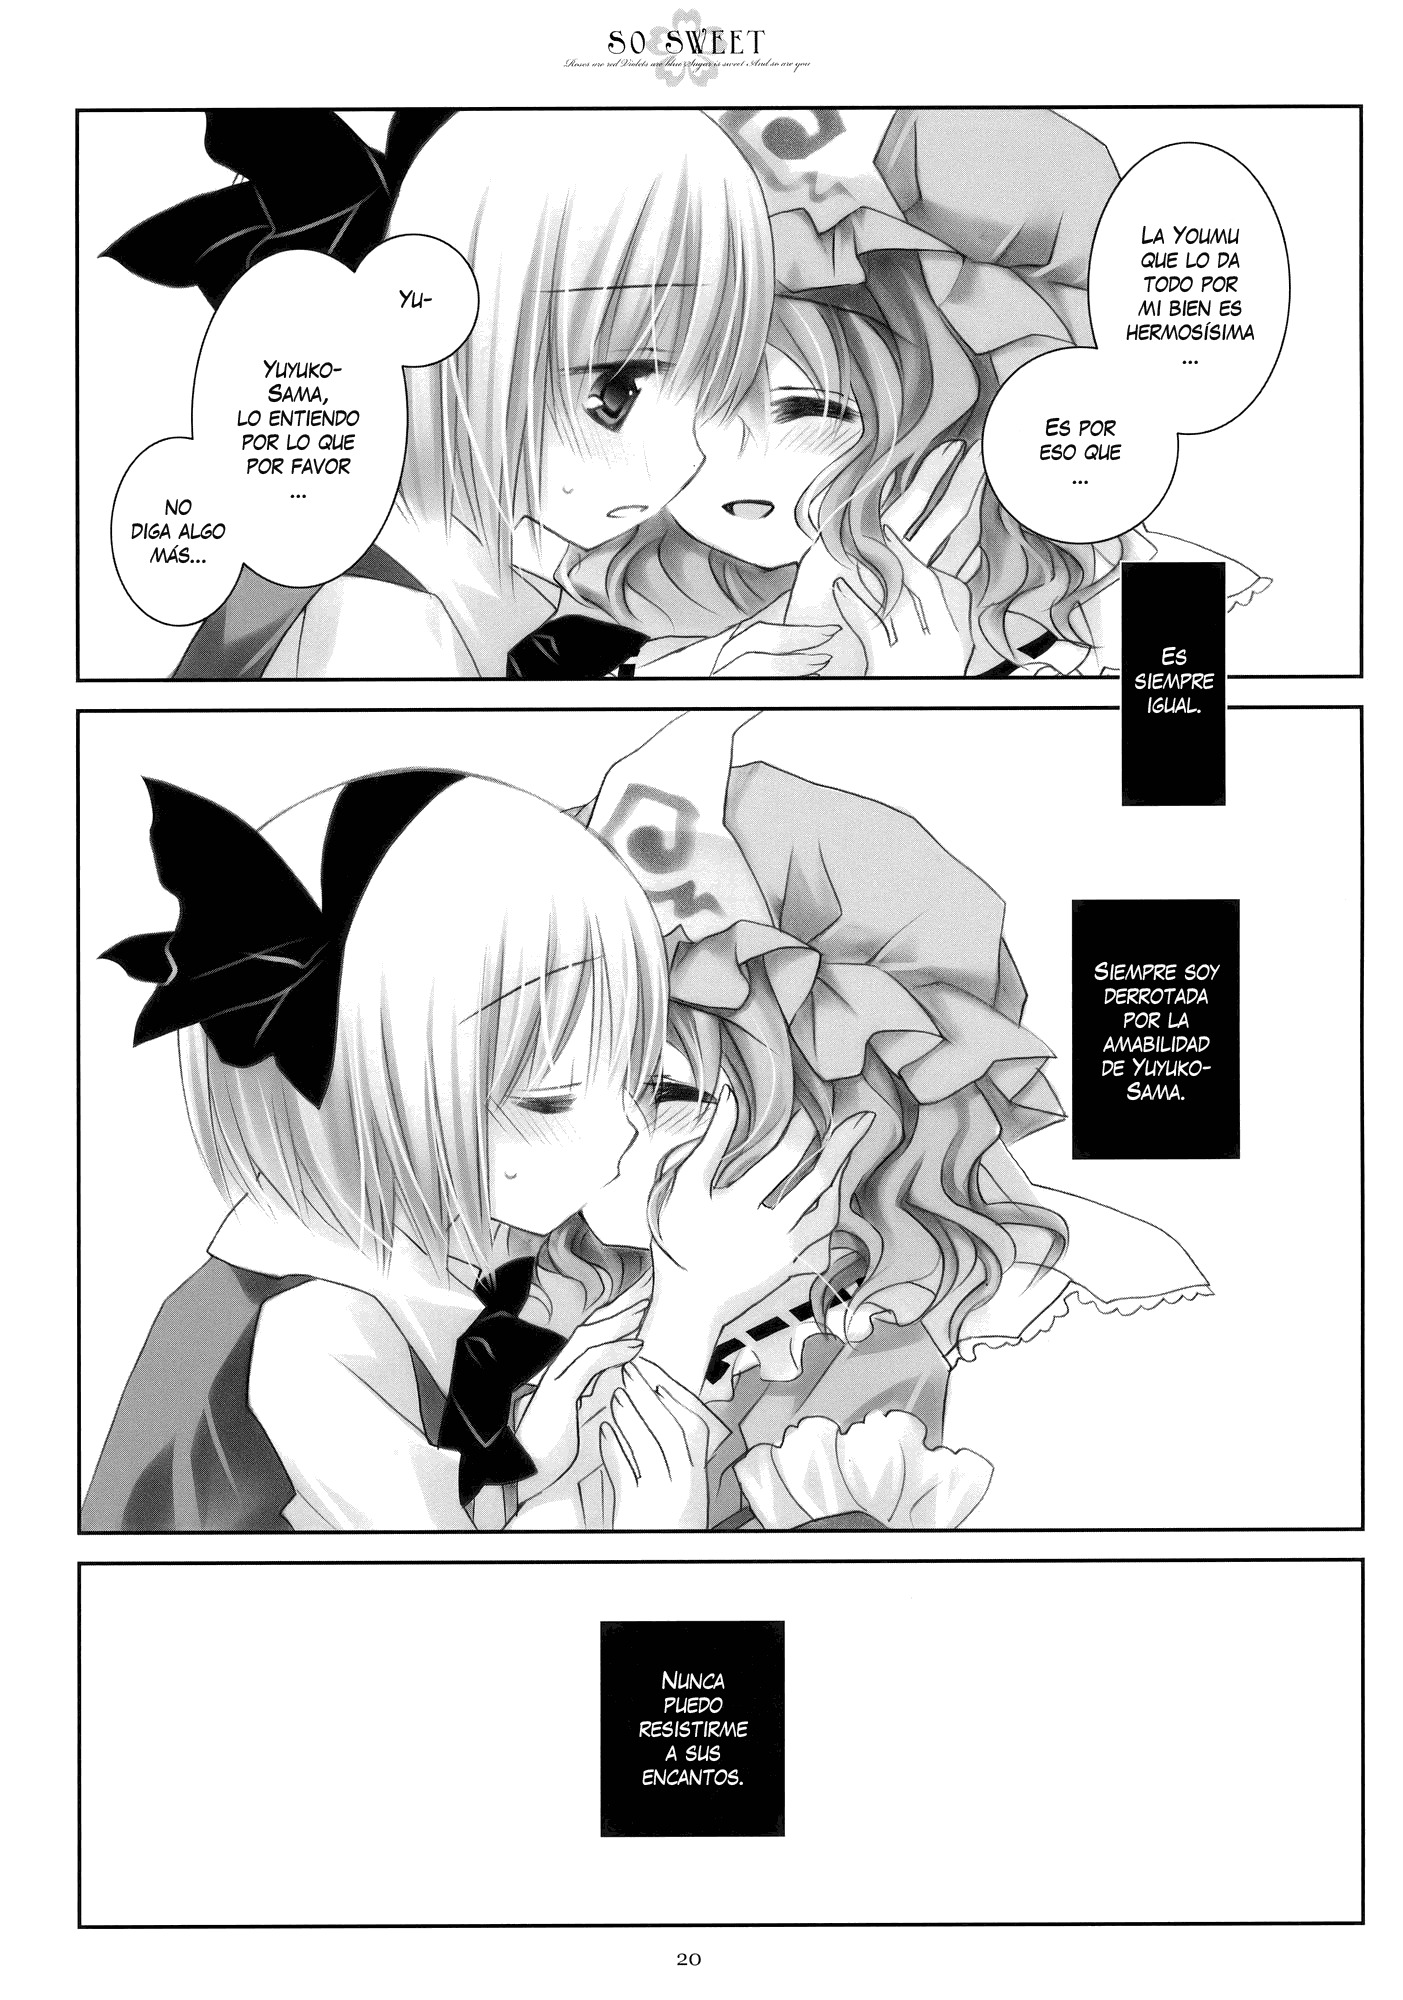 So sweet (Touhou Project)